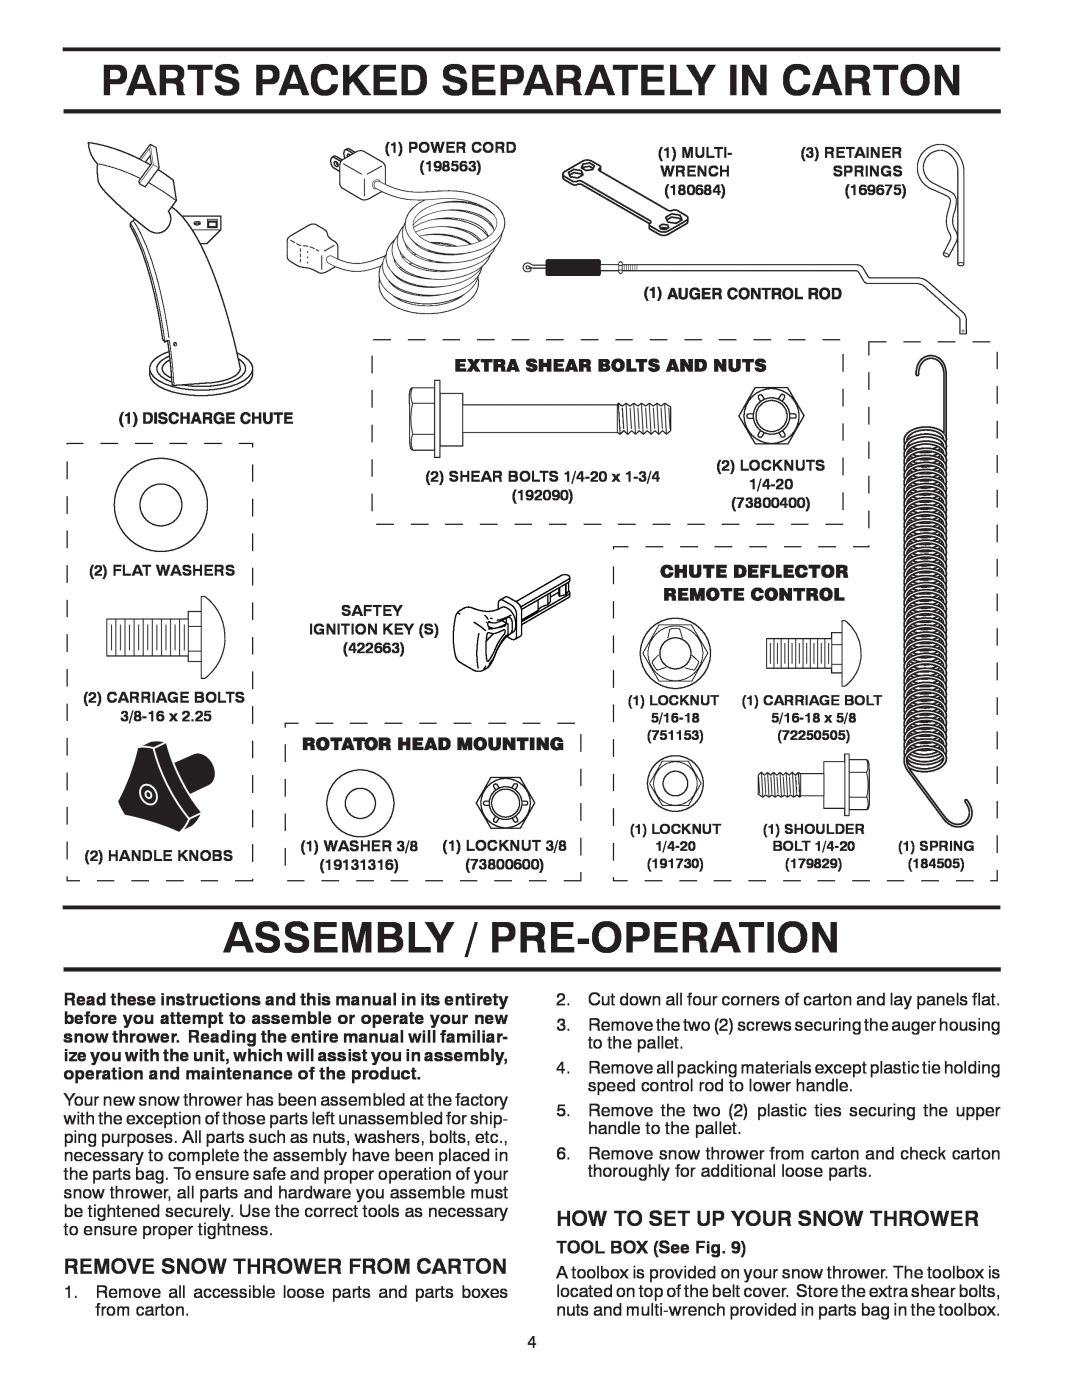 Poulan 435551 owner manual Parts Packed Separately In Carton, Assembly / Pre-Operation, Remove Snow Thrower From Carton 